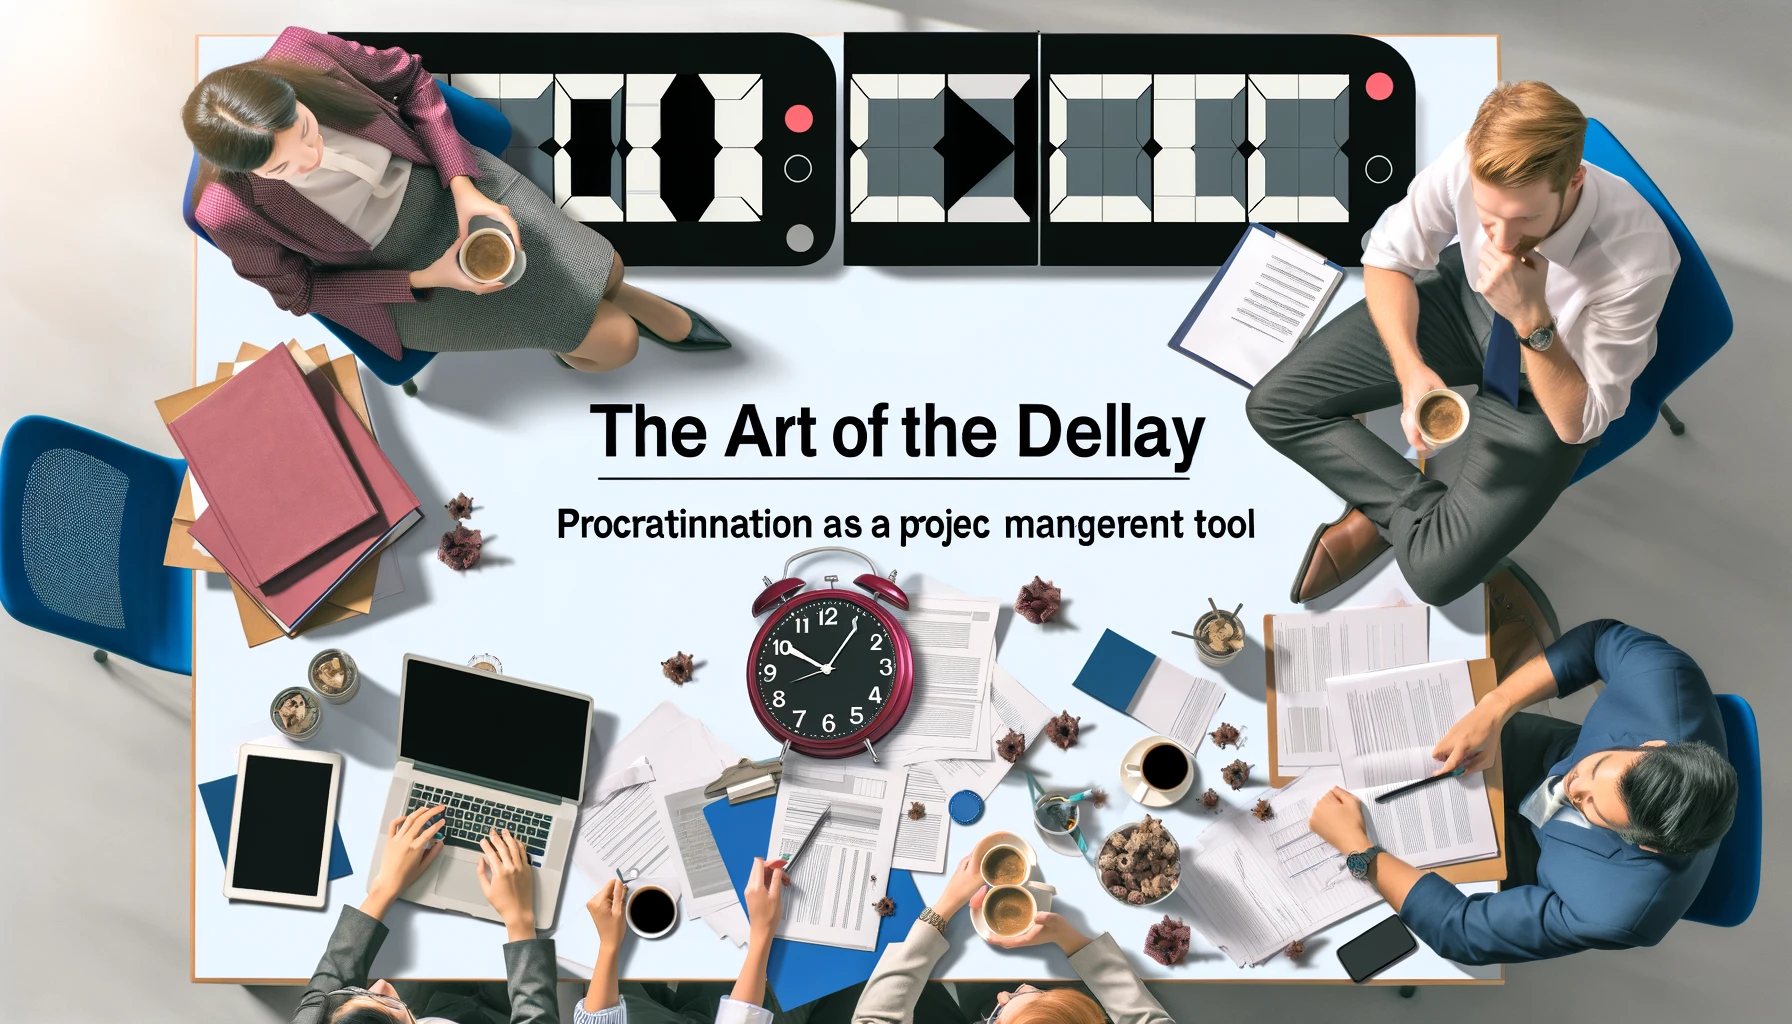 The Art of the Delay: Procrastination as a Project Management Tool